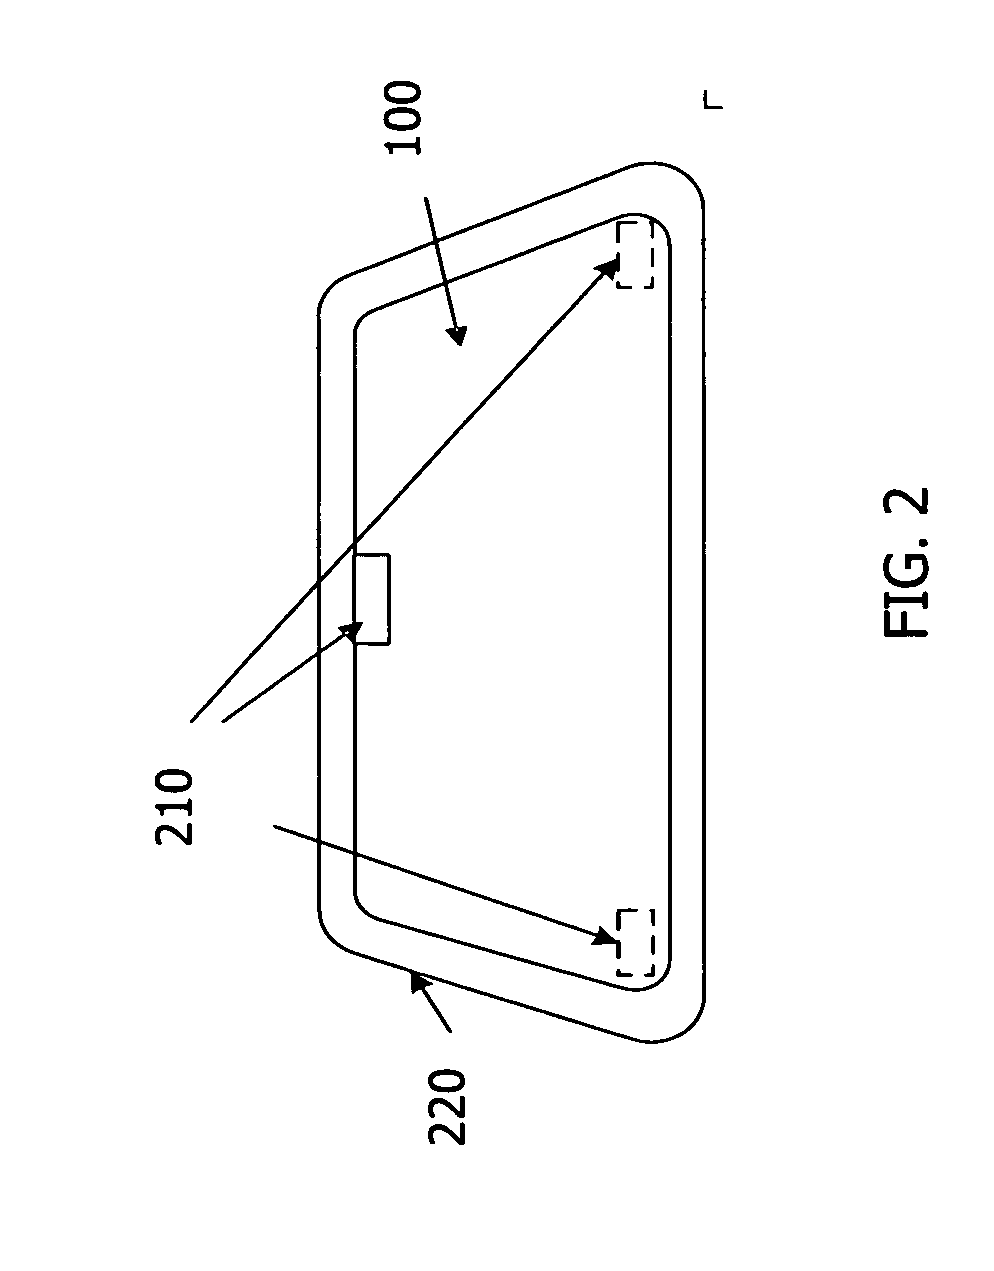 Radio frequency identification tag embedded in the windshields of vehicle for wirelessly determining vehicle identification, location and toll collection